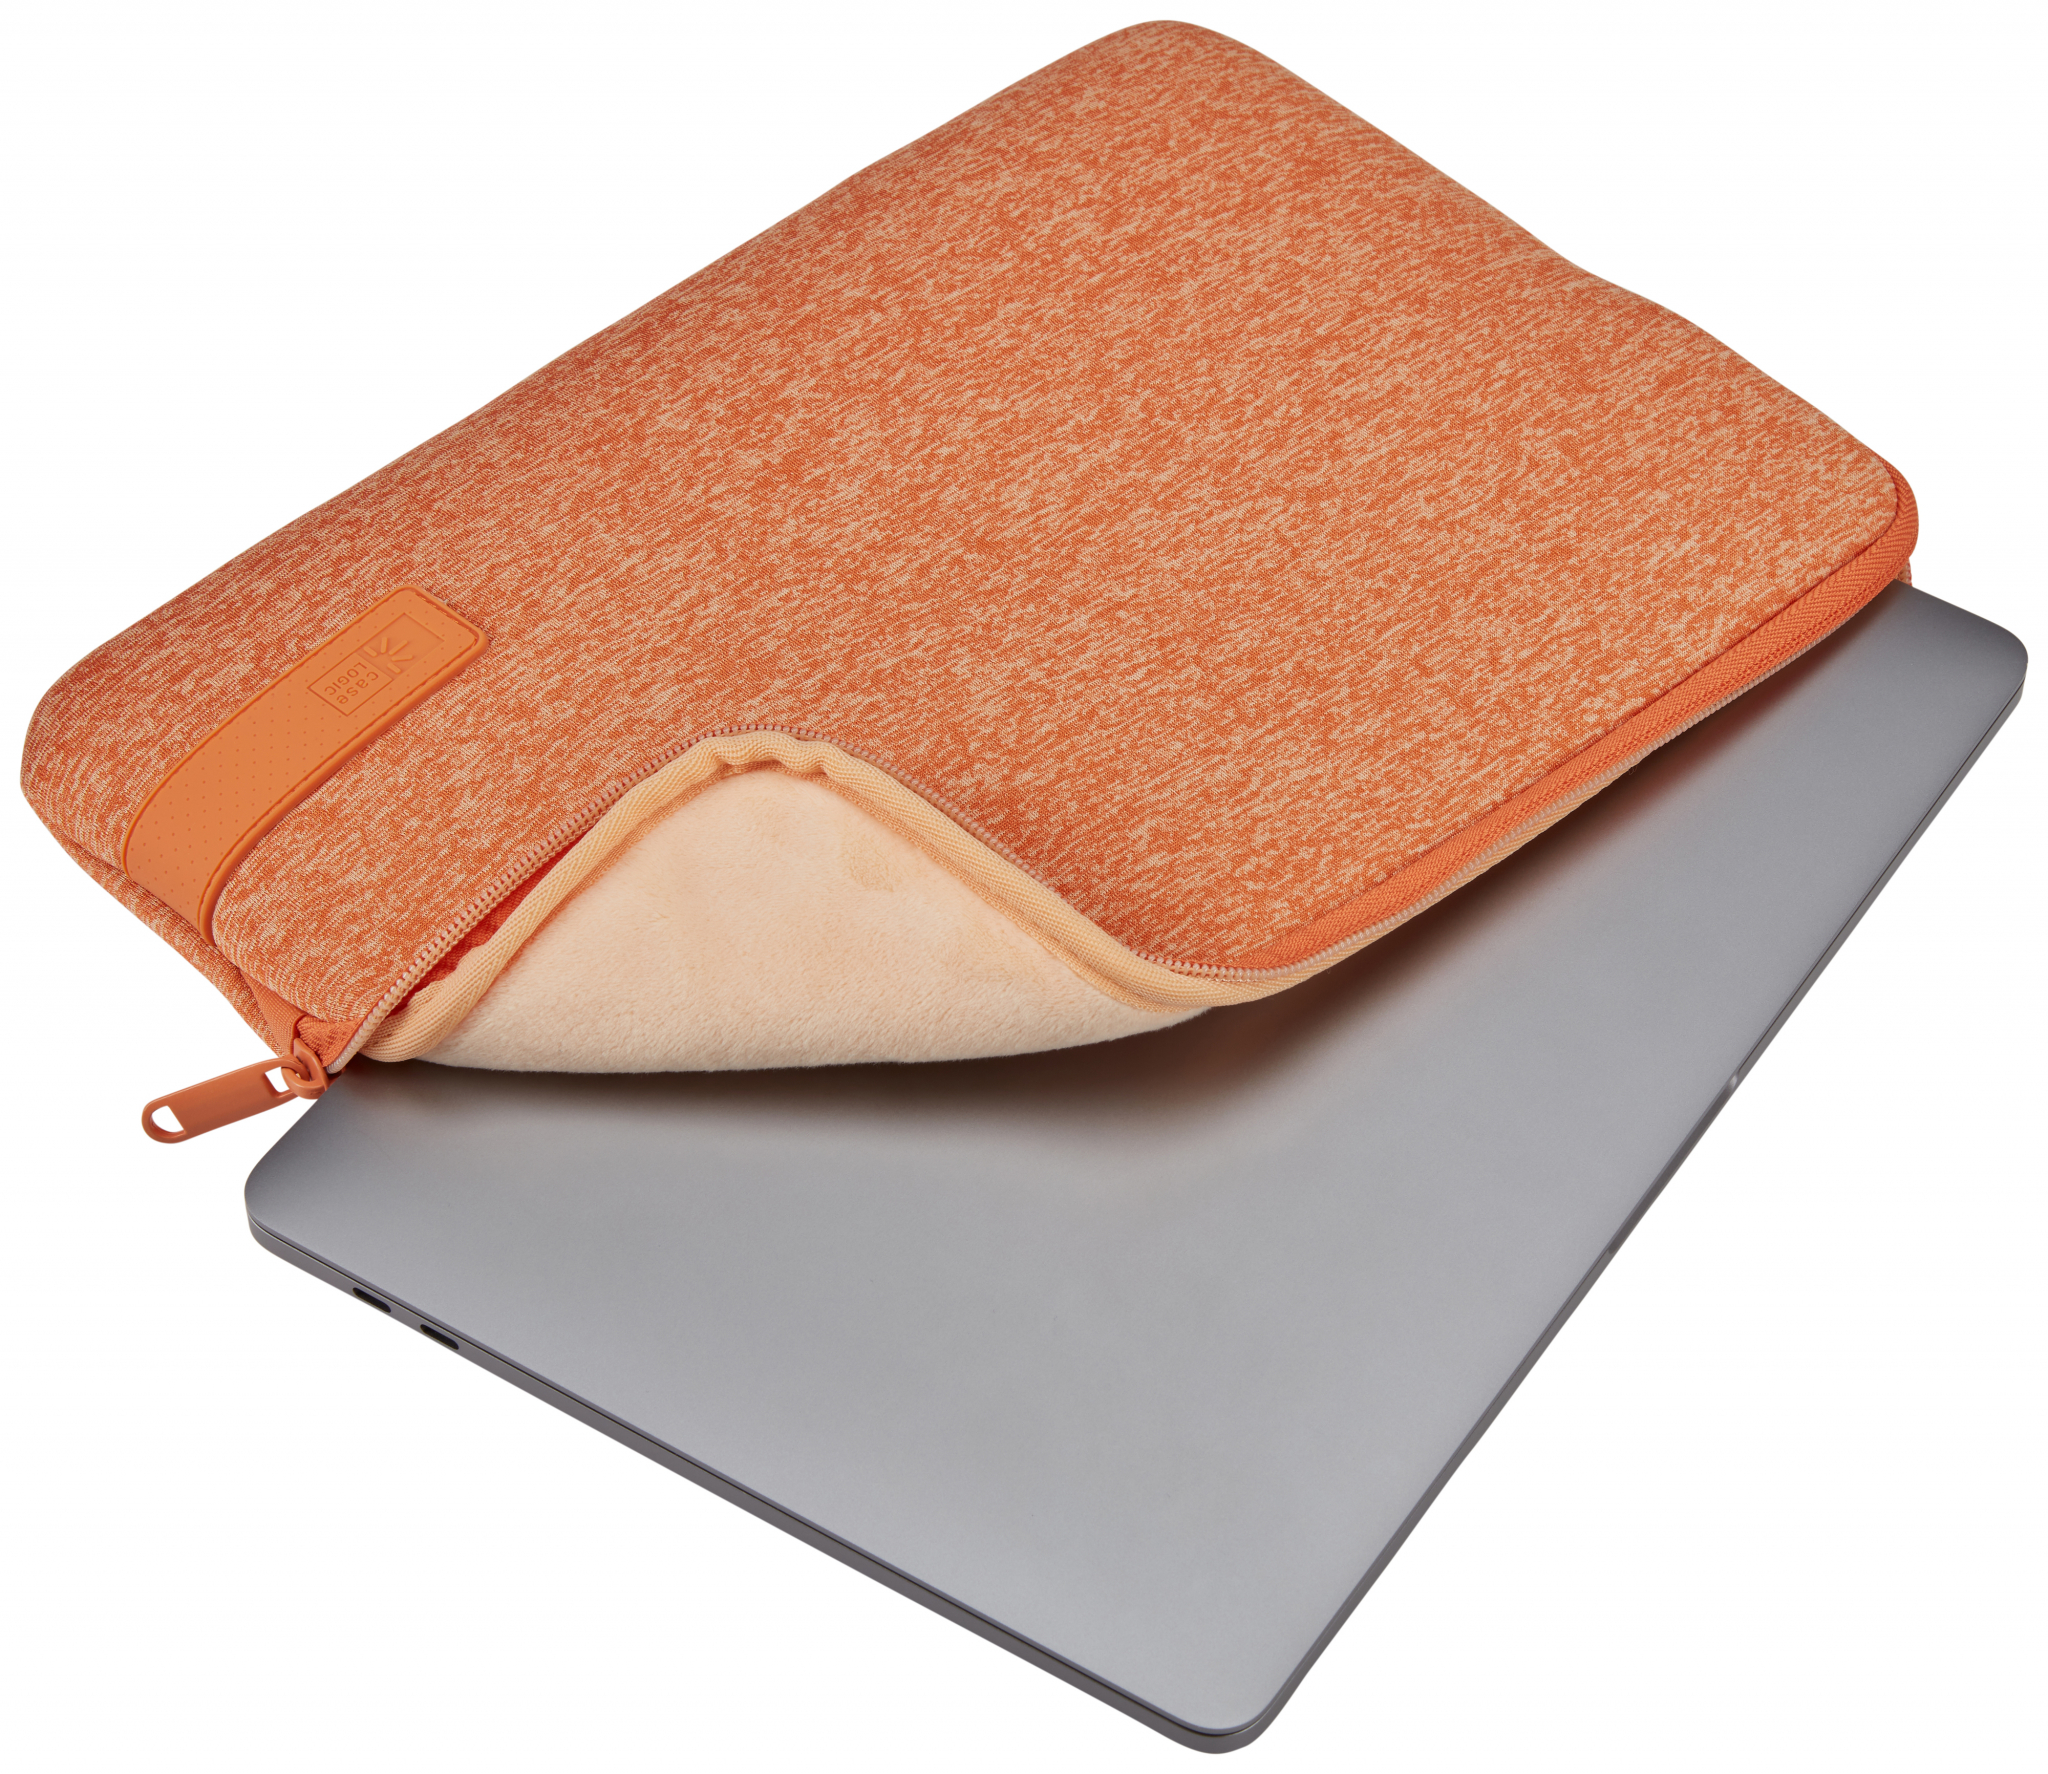 CASE LOGIC Reflect Coral Sleeve Gold/Apricot für Universal Polyester, Notebooksleeve